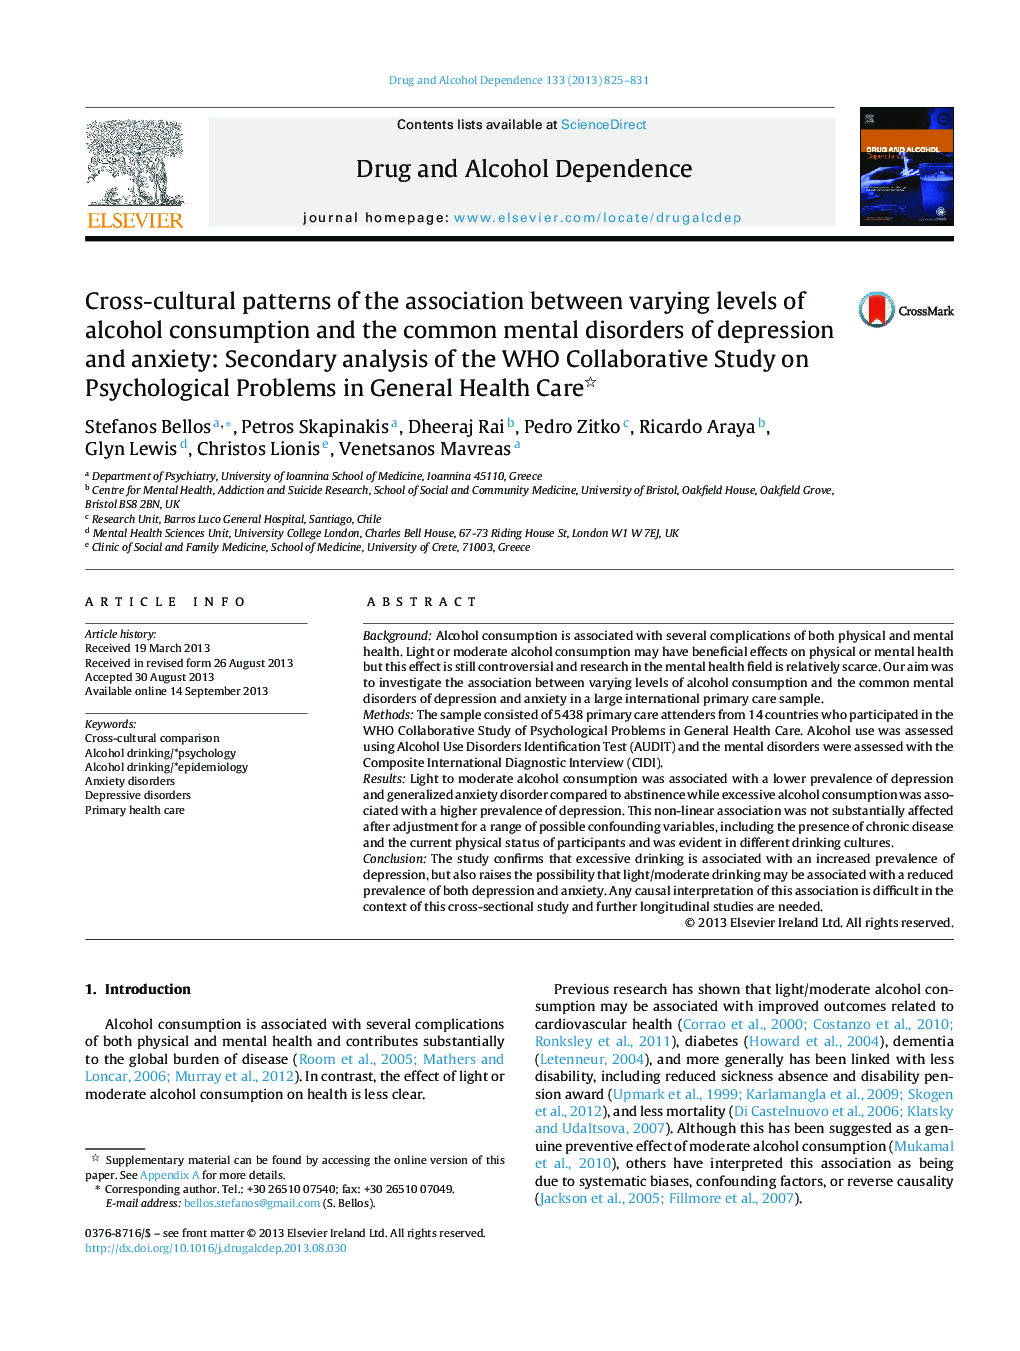 Cross-cultural patterns of the association between varying levels of alcohol consumption and the common mental disorders of depression and anxiety: Secondary analysis of the WHO Collaborative Study on Psychological Problems in General Health Care 